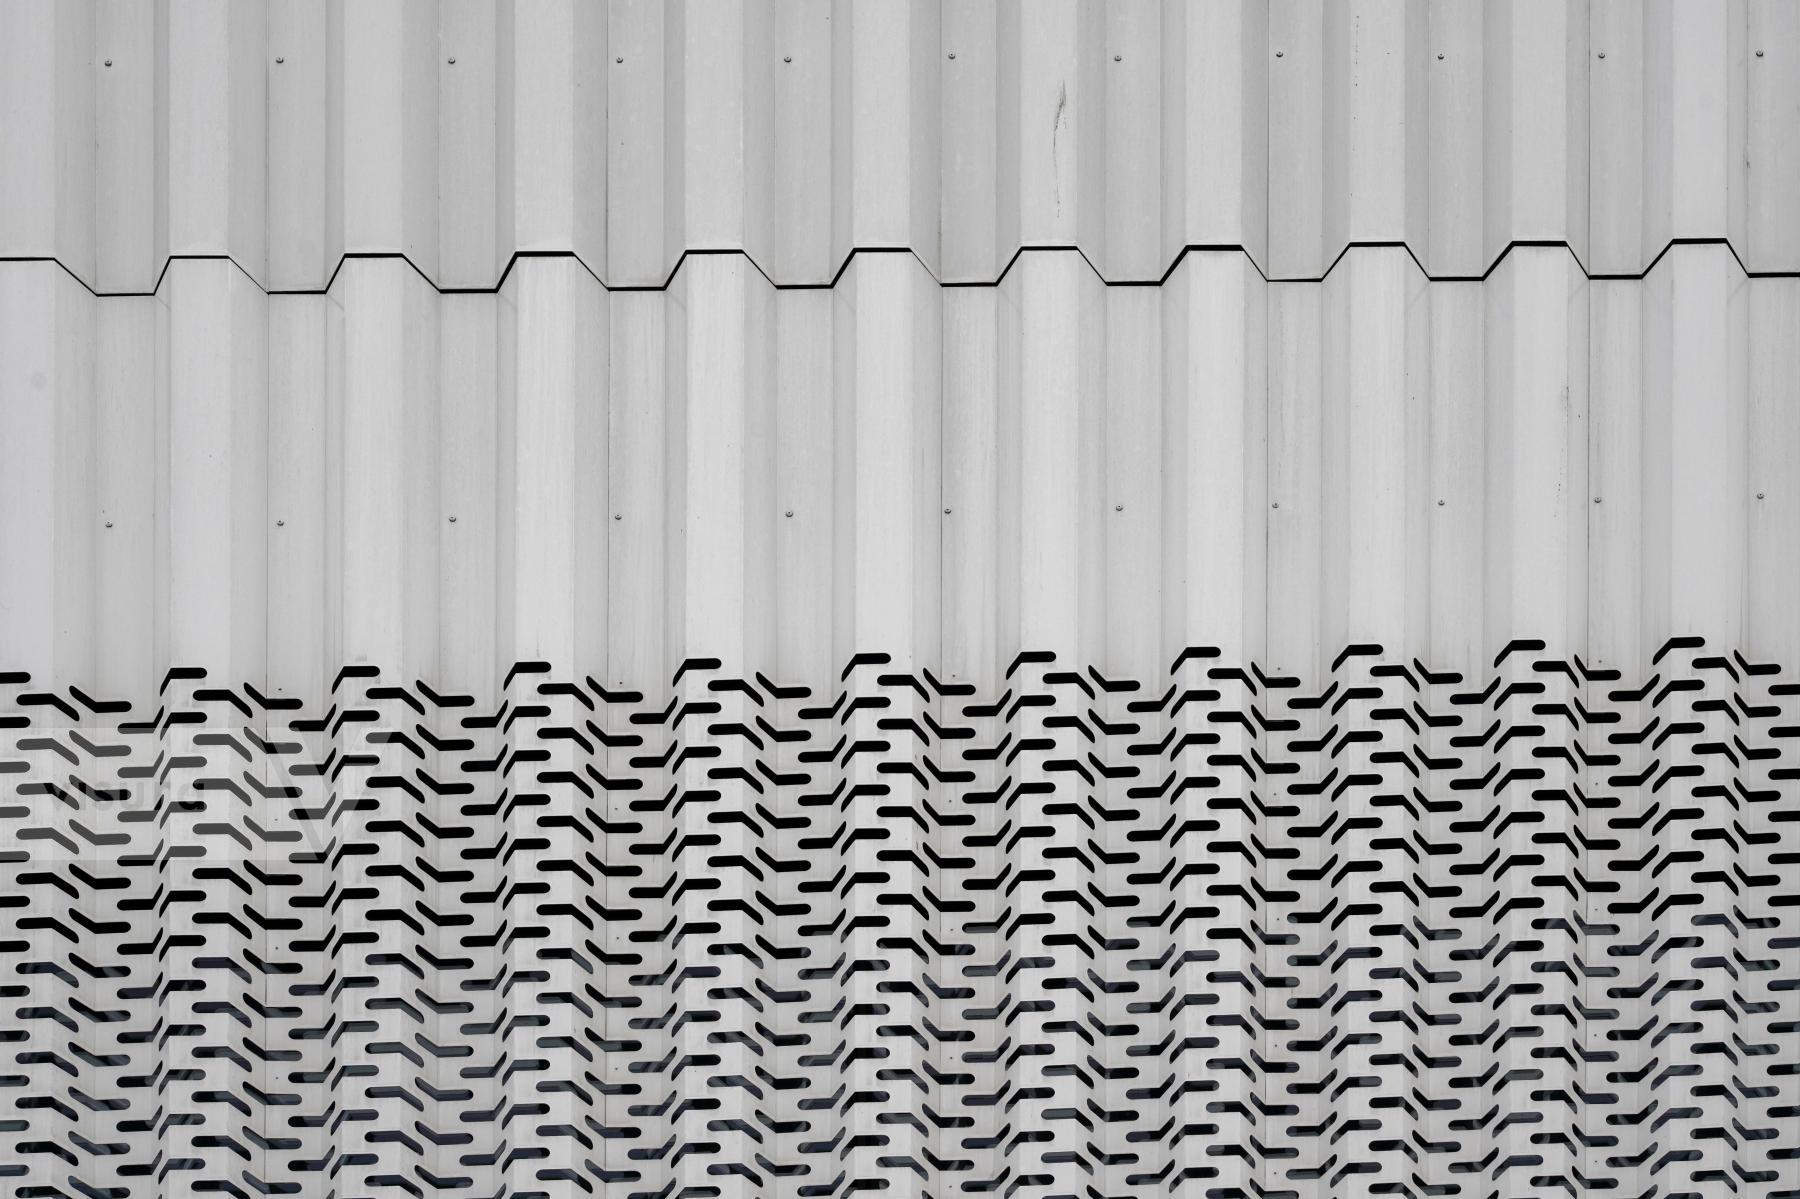 Purchase Rhythmic Repetition: Facade of a Sports Hall  by Michael Nguyen